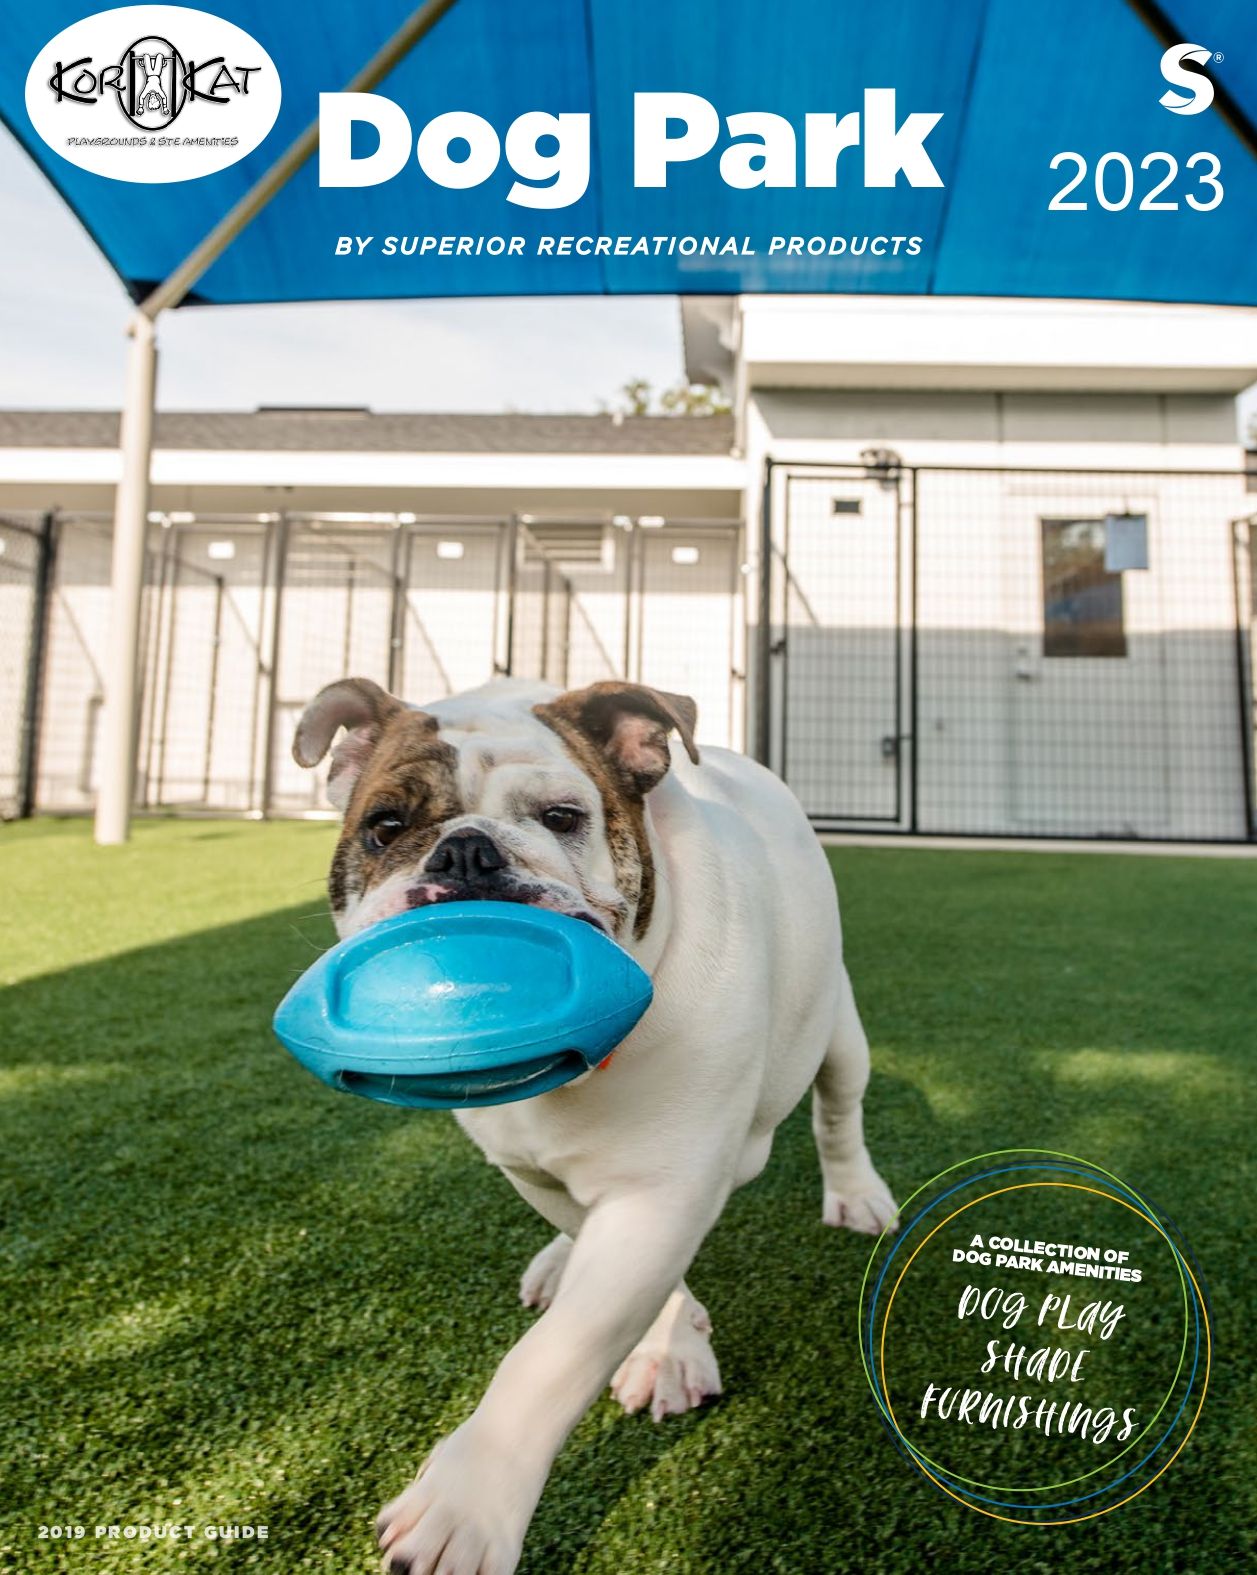 outdoor dog play equipment